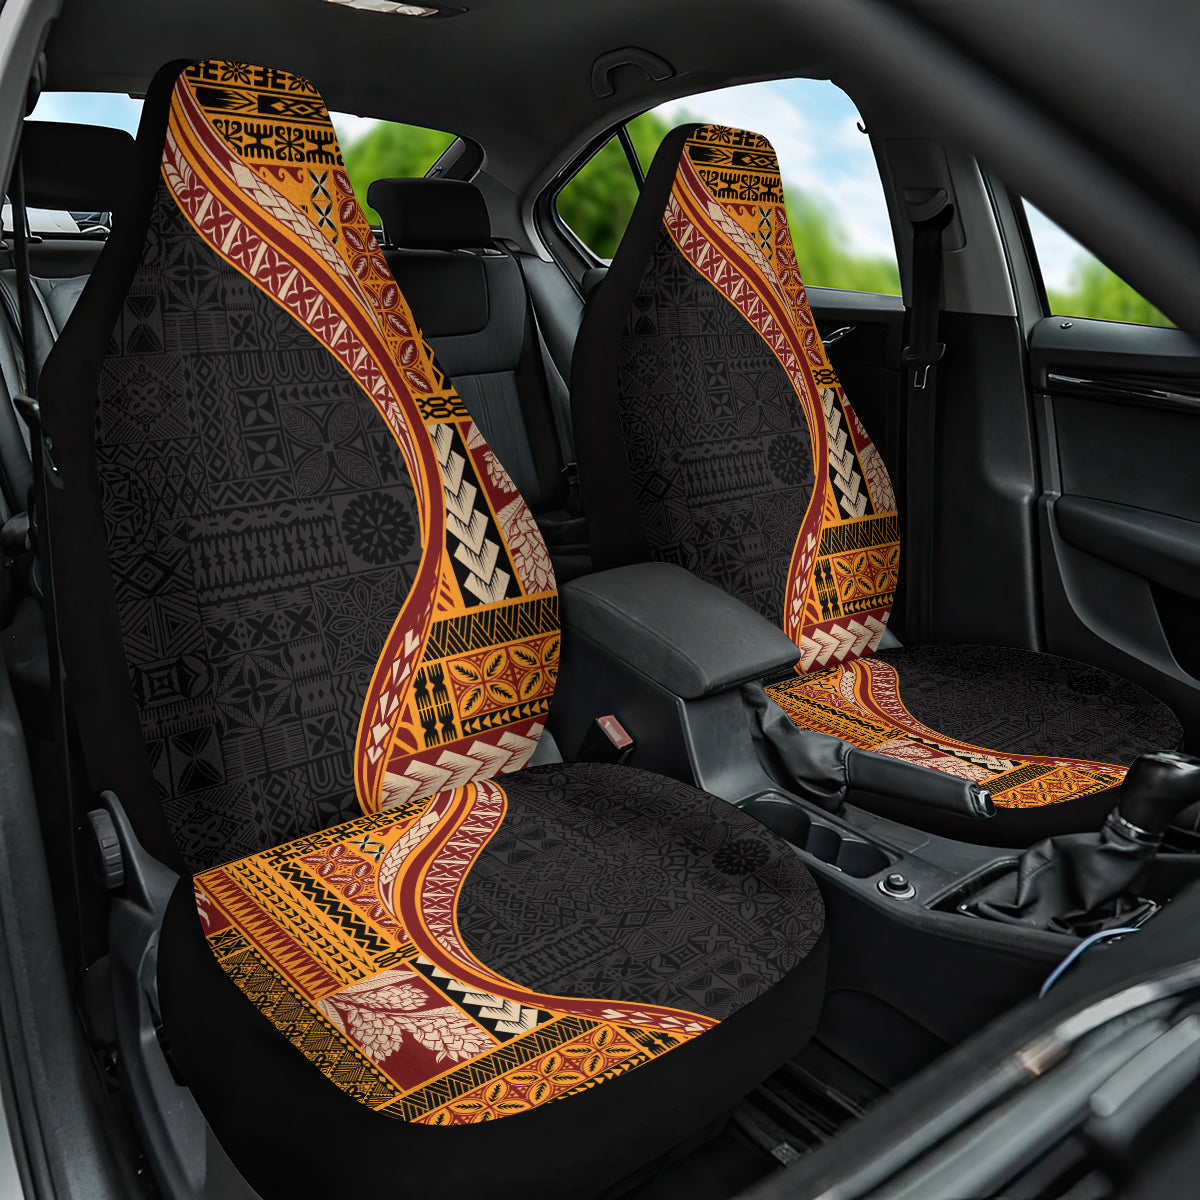 Samoa Siapo Motif and Tapa Pattern Half Style Car Seat Cover Yellow Color